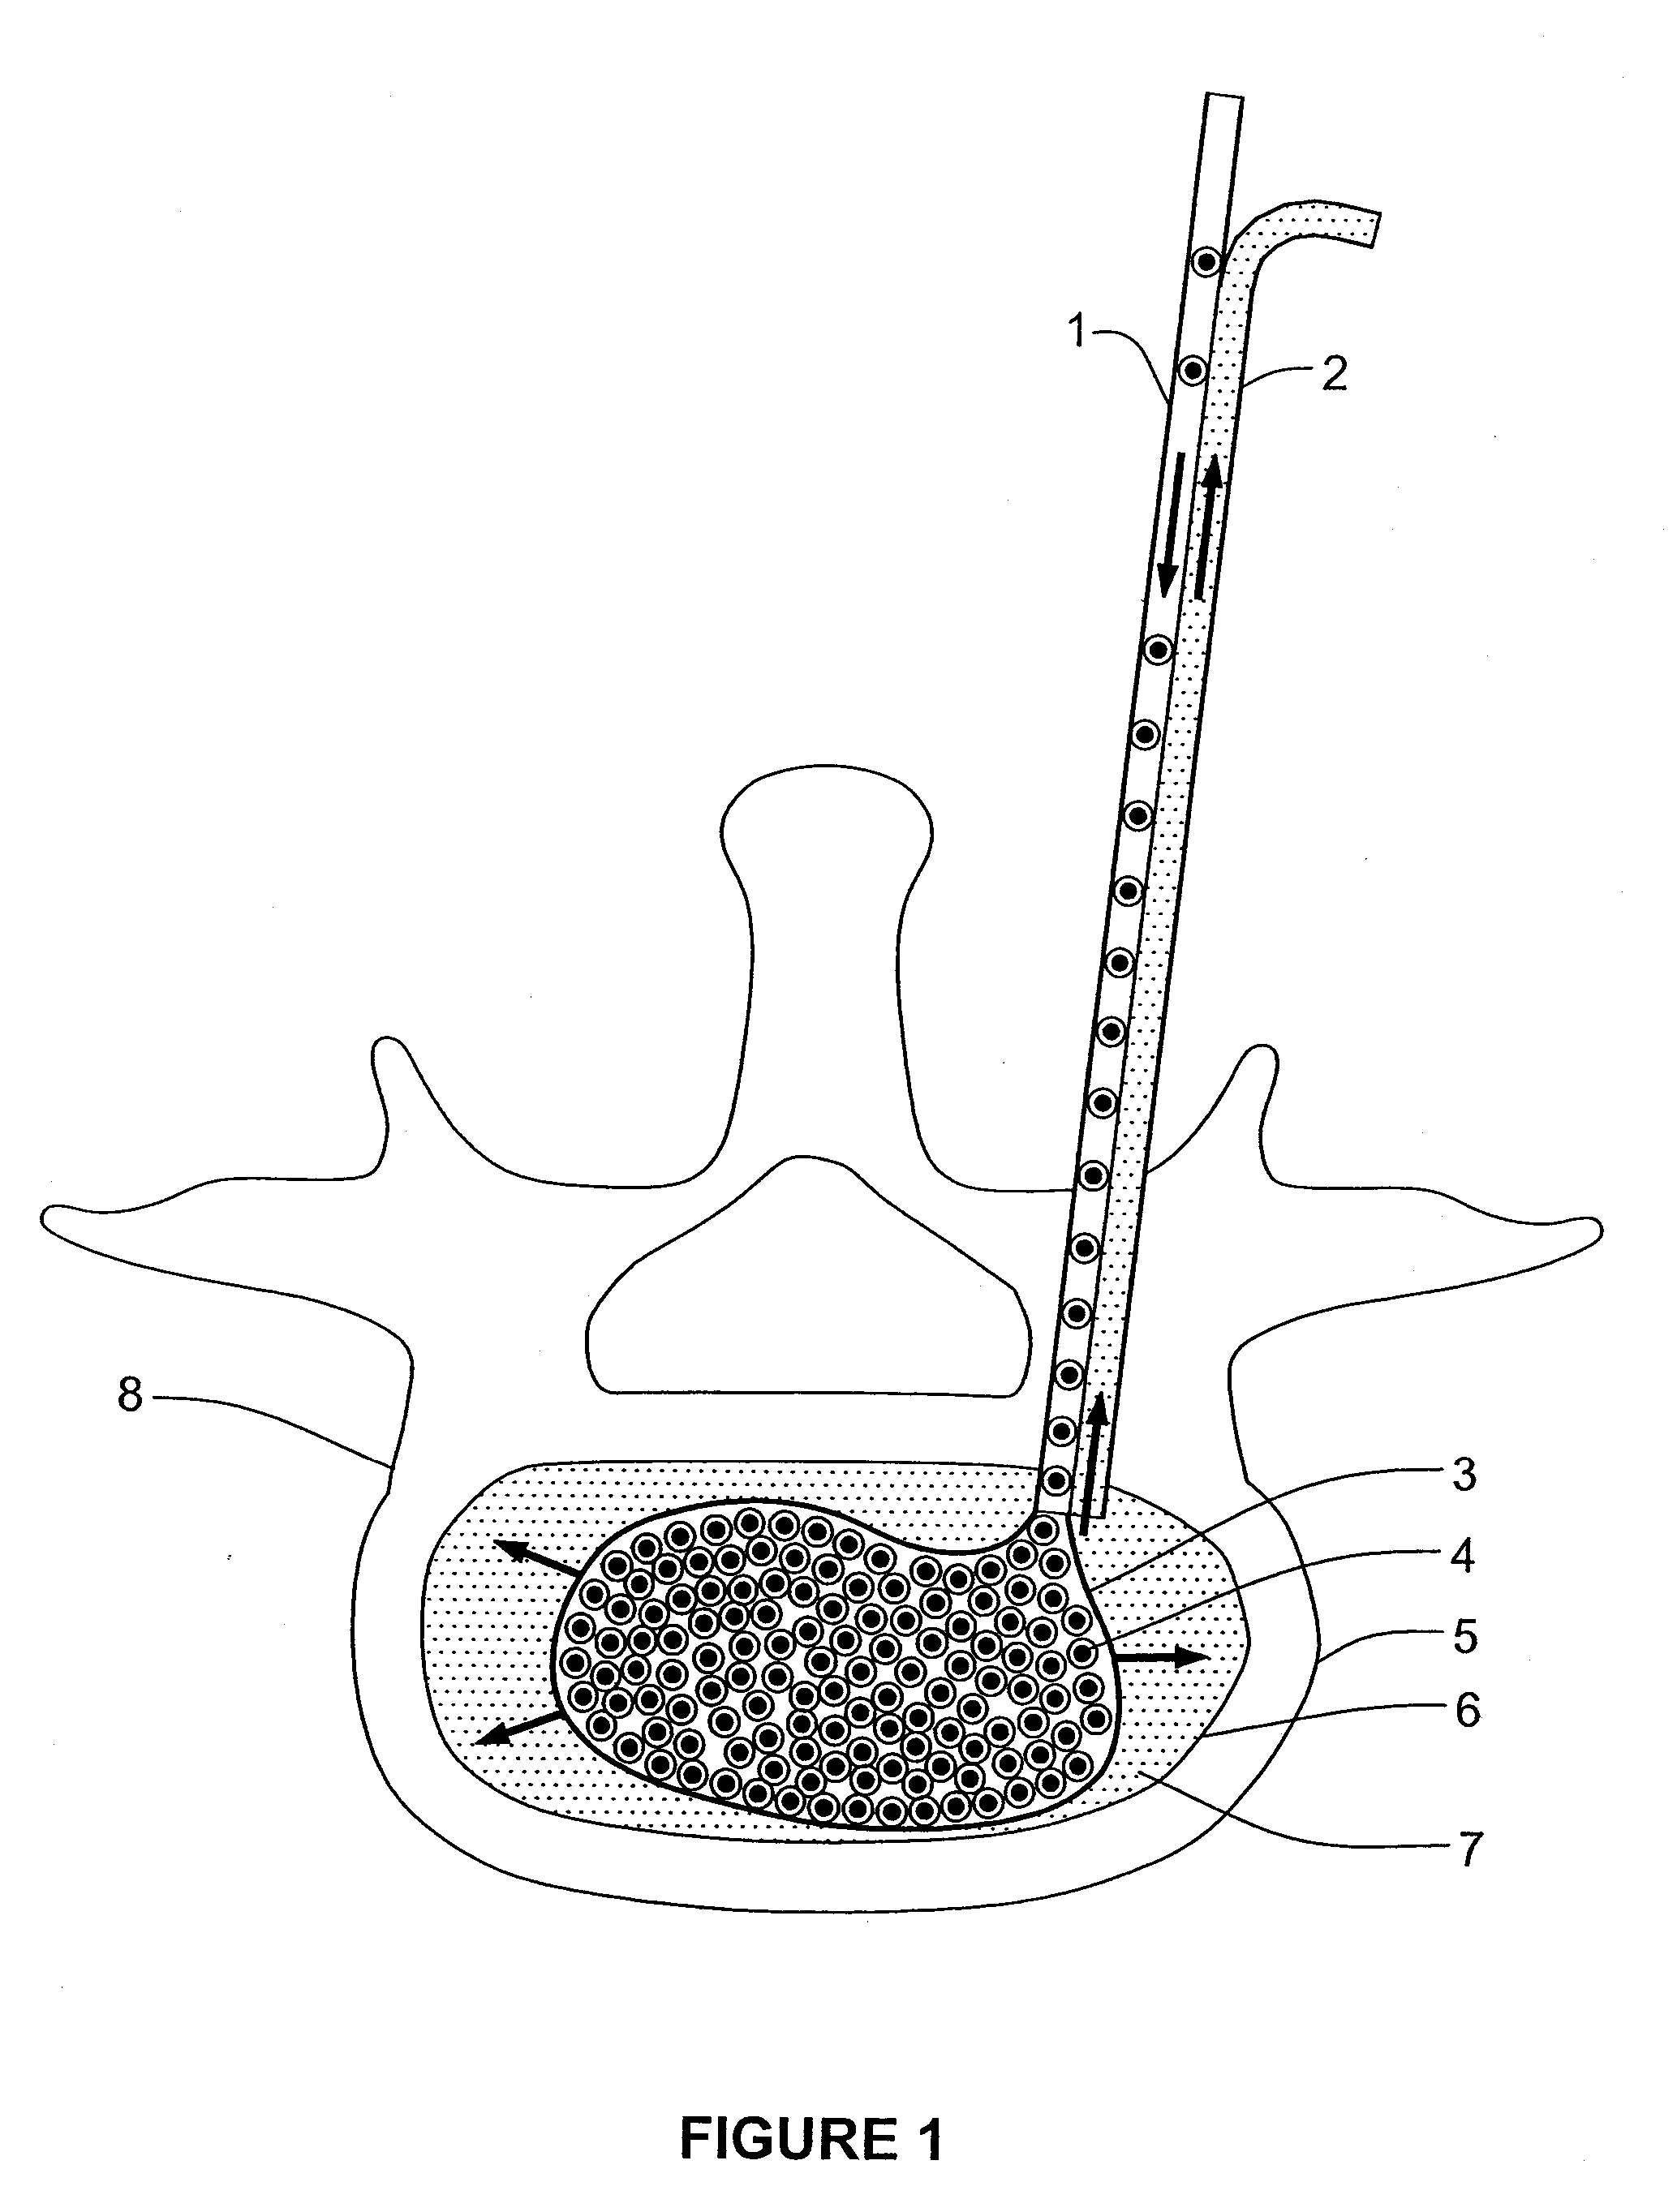 Method and device for reducing susceptibility to fractures in vertebral bodies